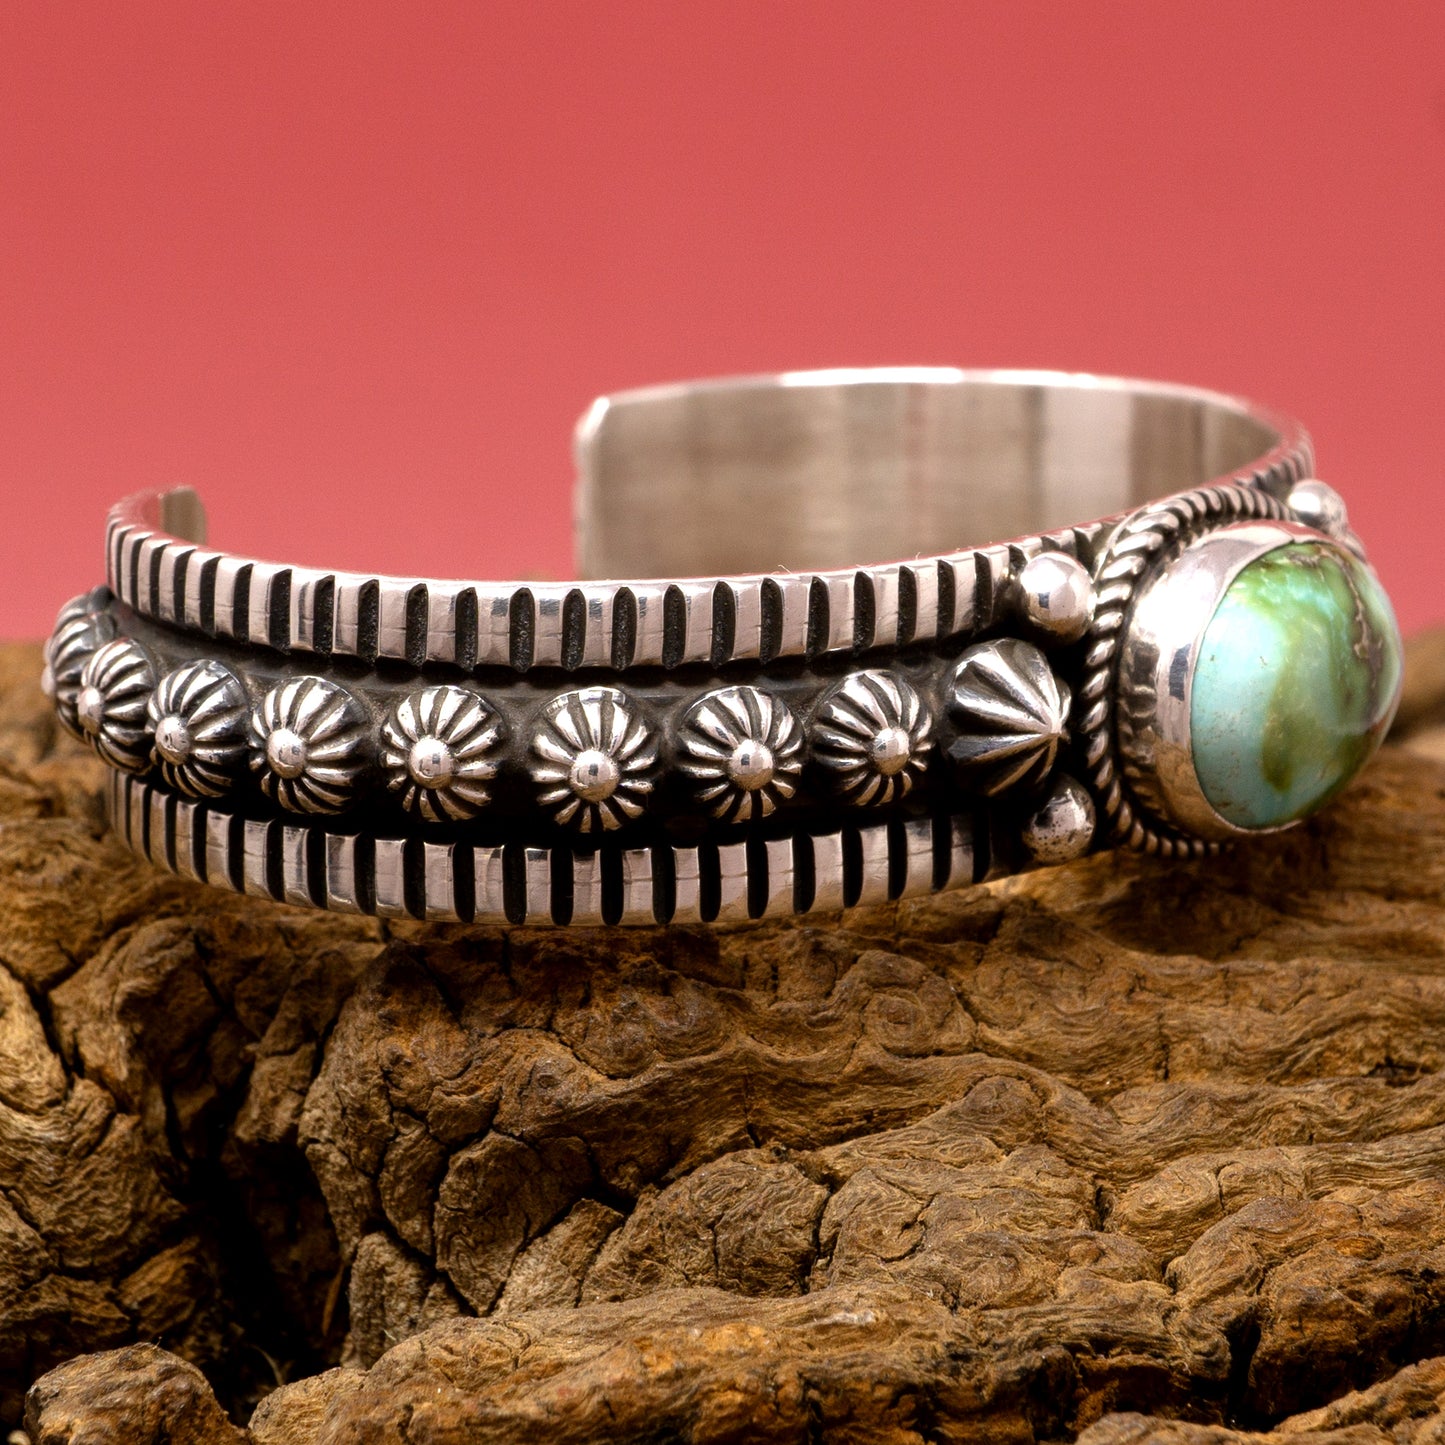 Sonoran Gold Turquoise Hand-stamped and Overlay Silver Cuff Bracelet